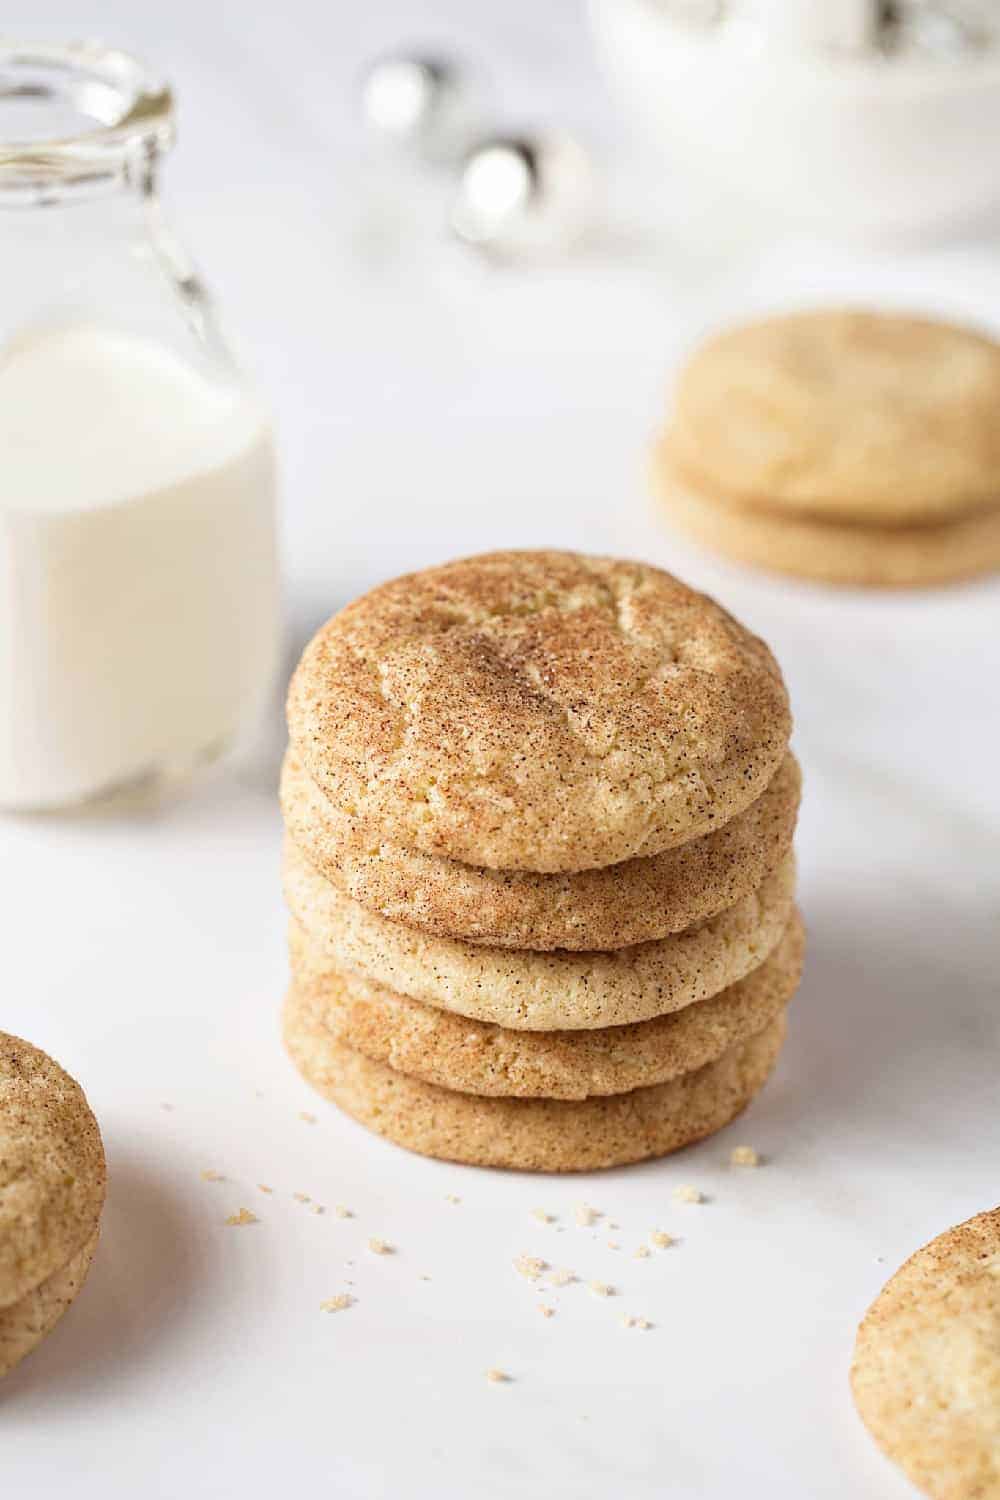 This Easy Snickerdoodle Cookies Recipe is going to be your new favorite holiday cookie! Easy and delicious.